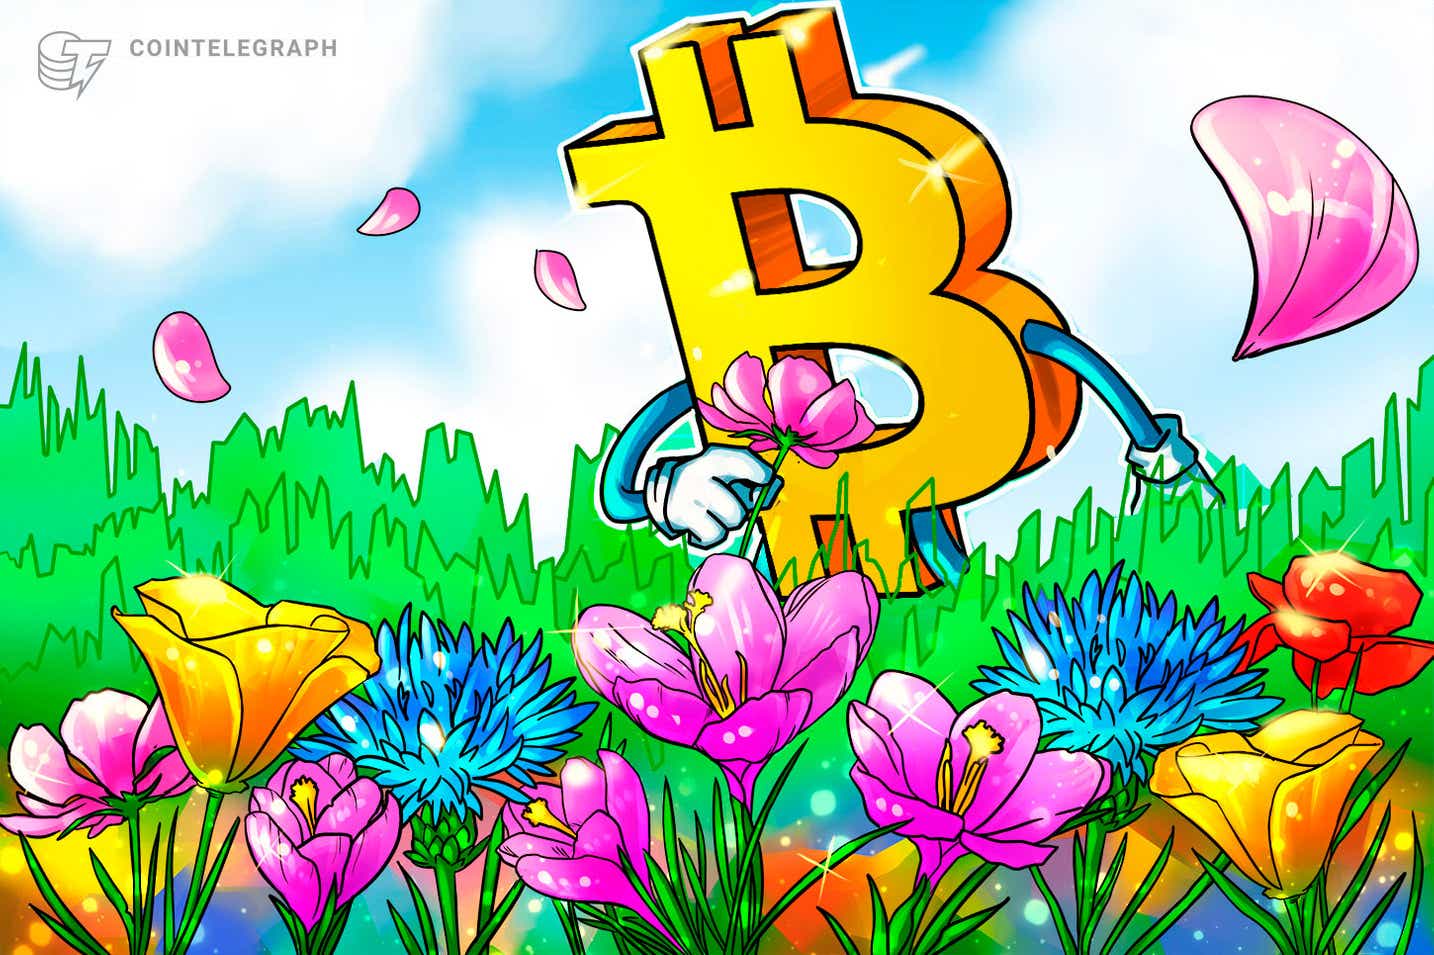 Flower powered: Bitcoin miner heats greenhouses in the Netherlands